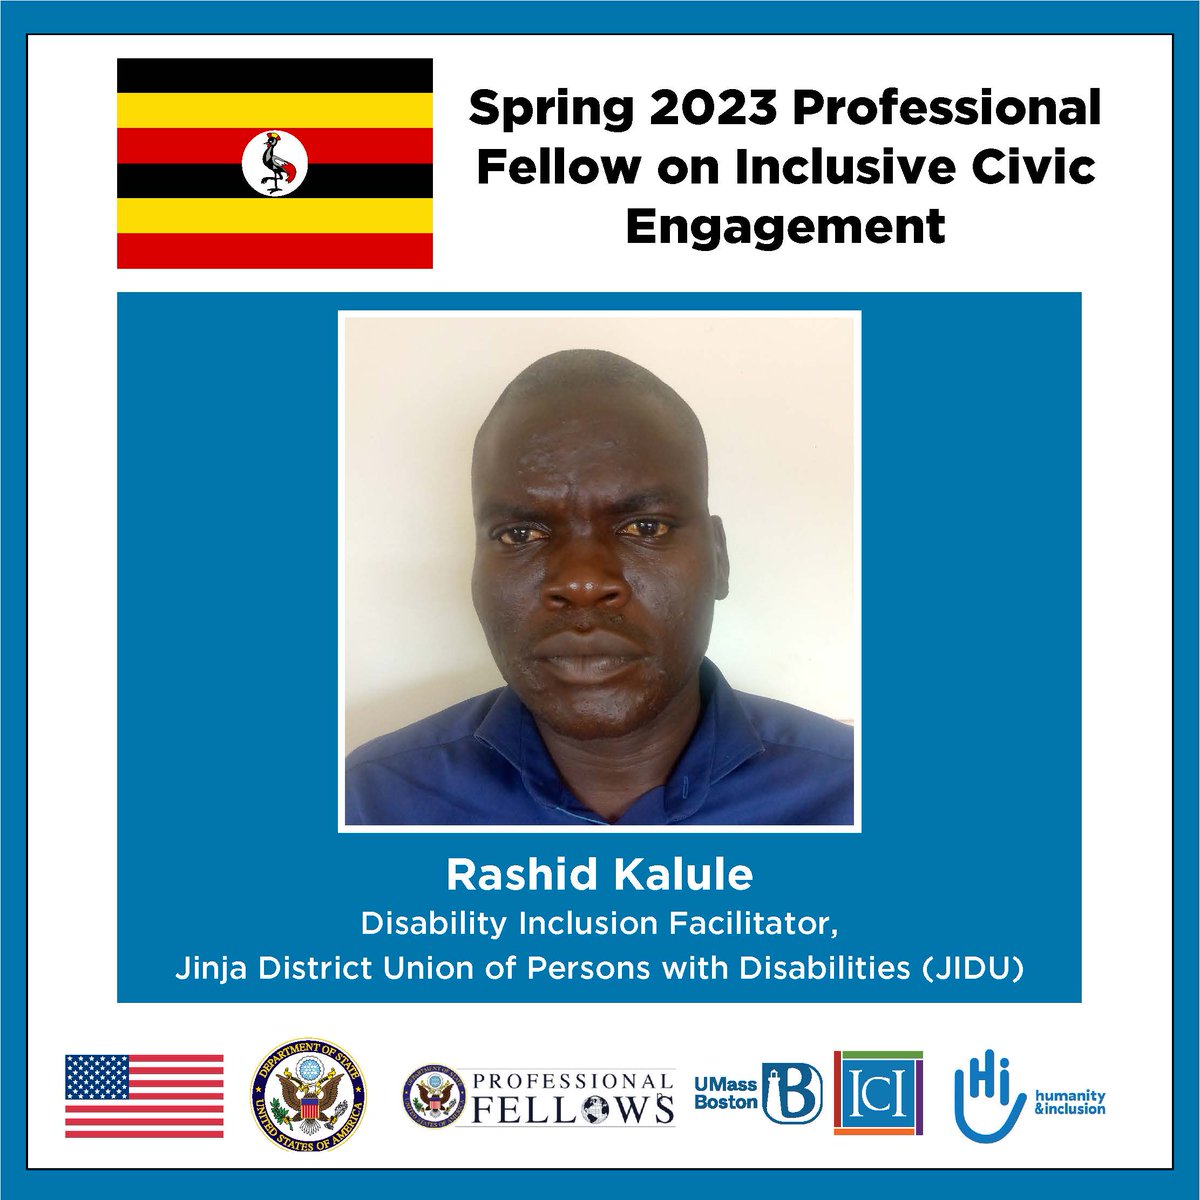 We welcome, #ProFellows Rashid Kalule! Rashid will work  on his inclusive civic engagement project to increase the # of persons w/cerebral palsy engaged in disability advocacy.
@ECAatState @ICInclusion @HI_EARegion 
#ExchangeOurWorld #CitizenDiplomacy